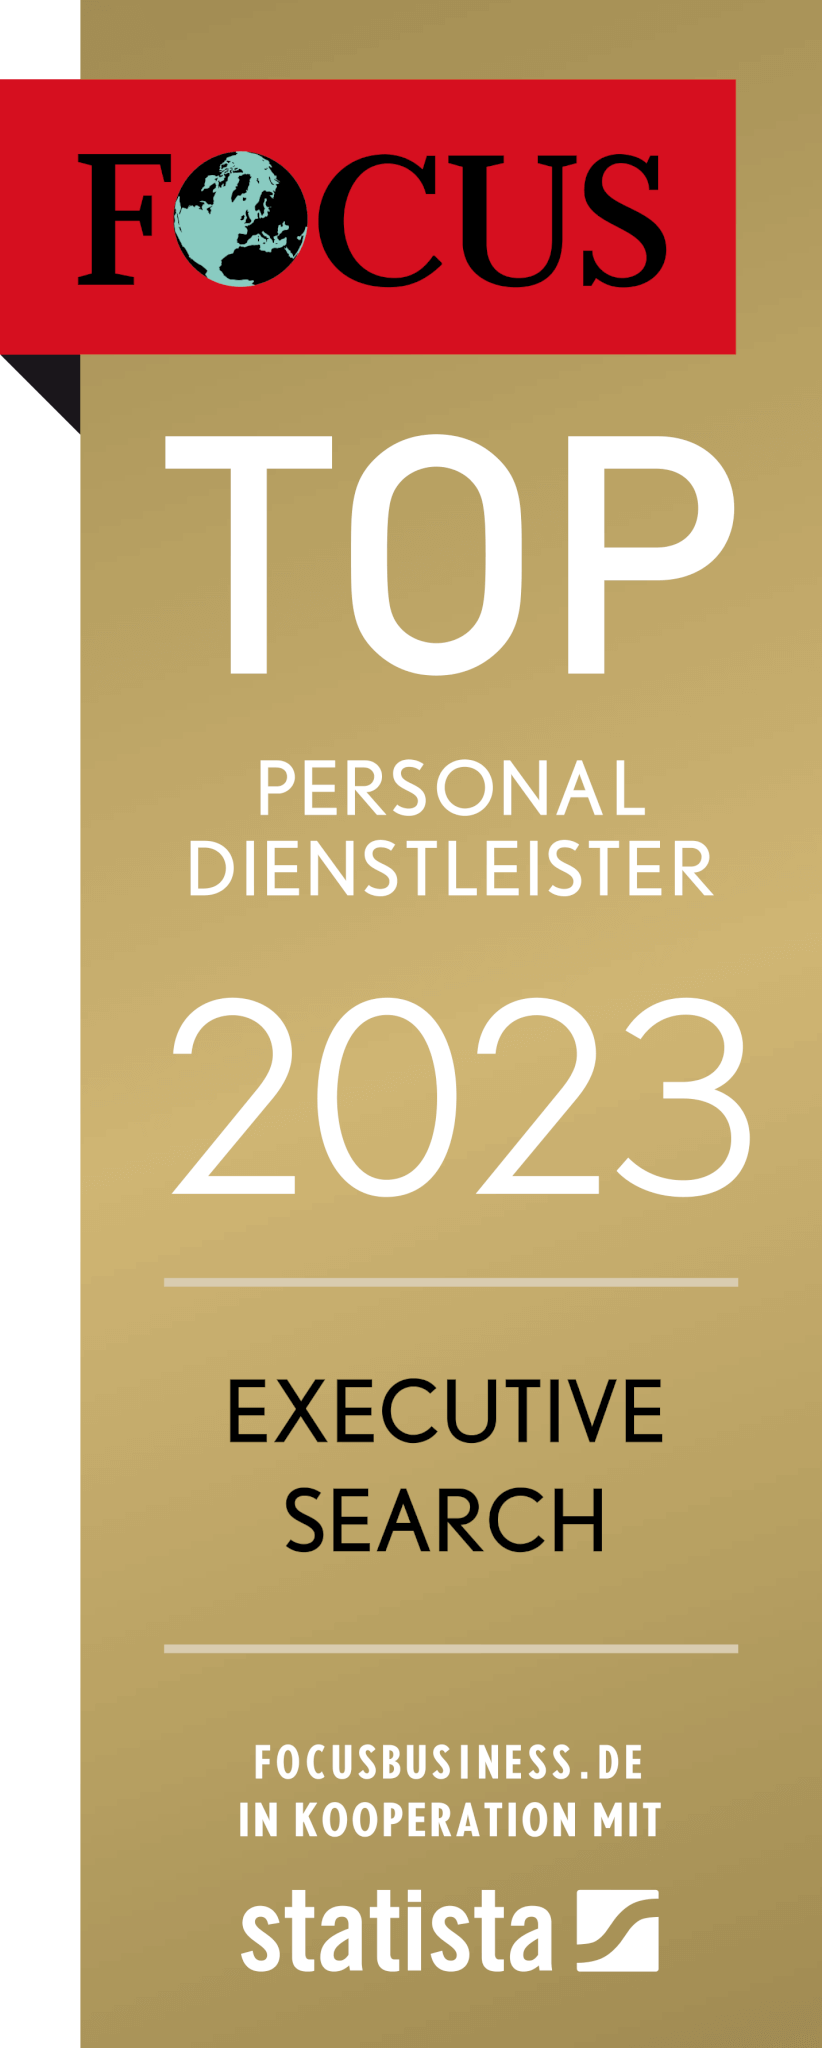 Focus_Top_Personaldienstleister_2021_Executive Search